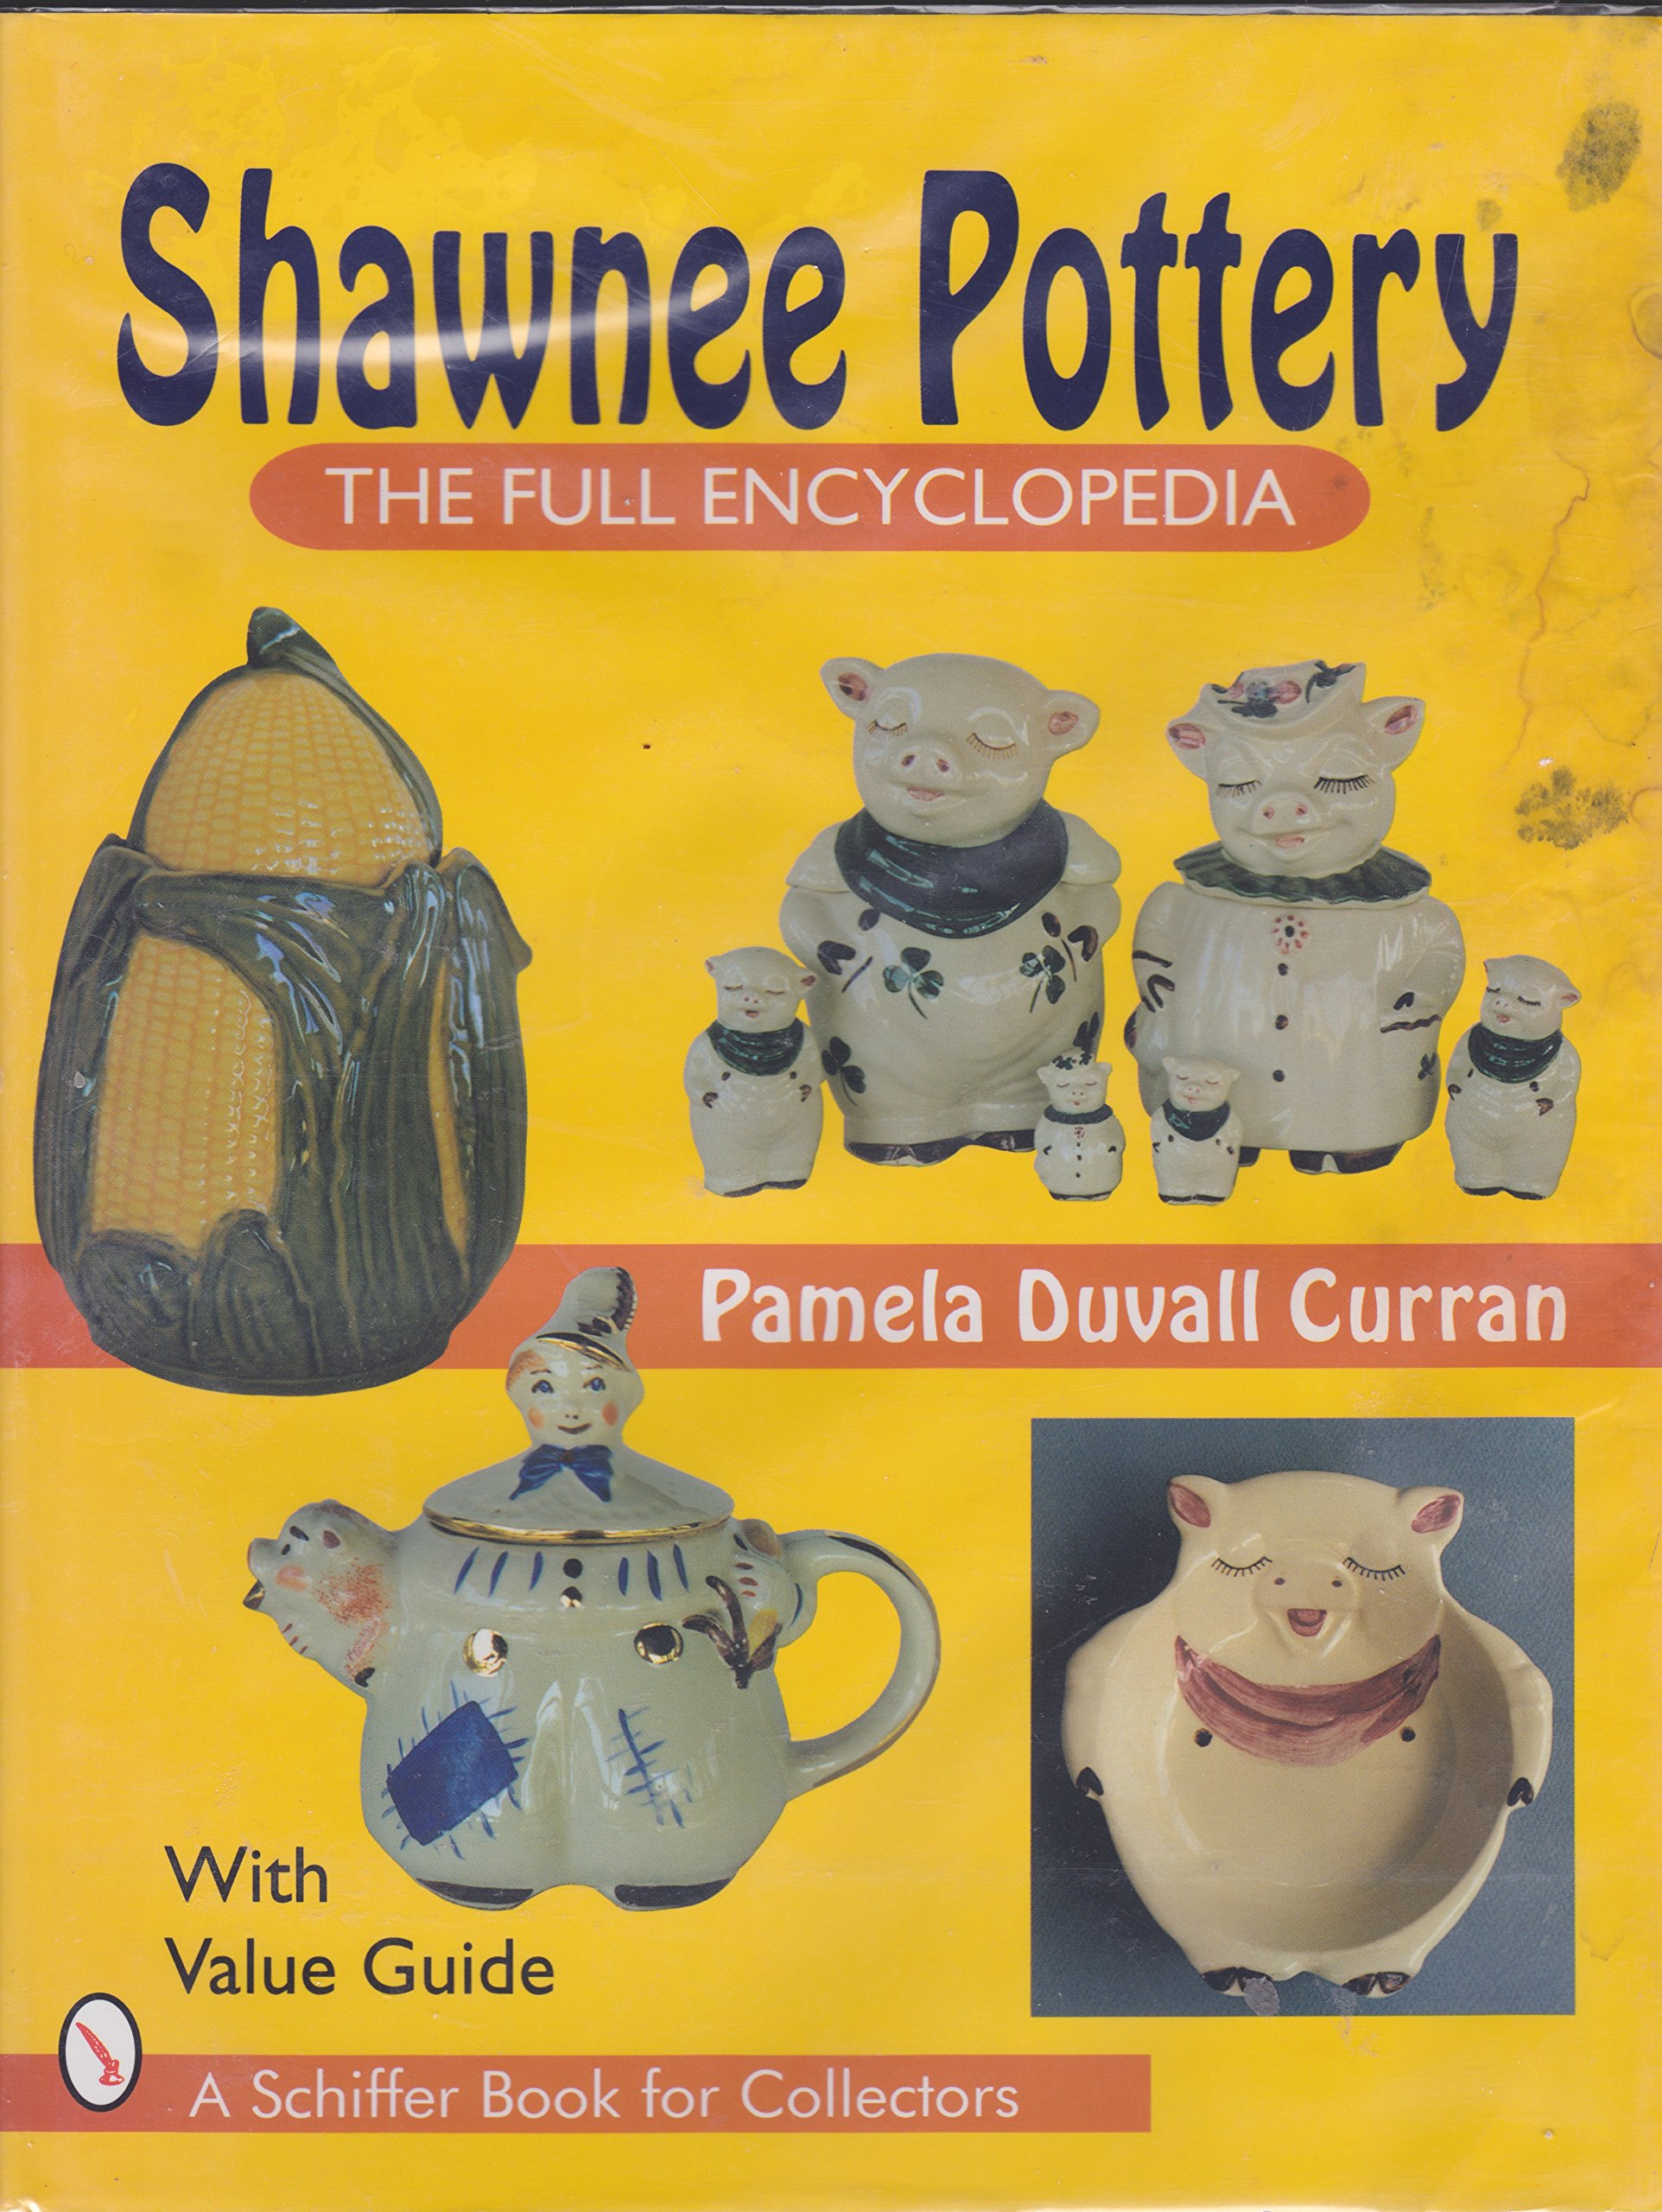 Shawnee Pottery: The Full Encyclopedia With Value Guide (A Schiffer Book for Collectors)